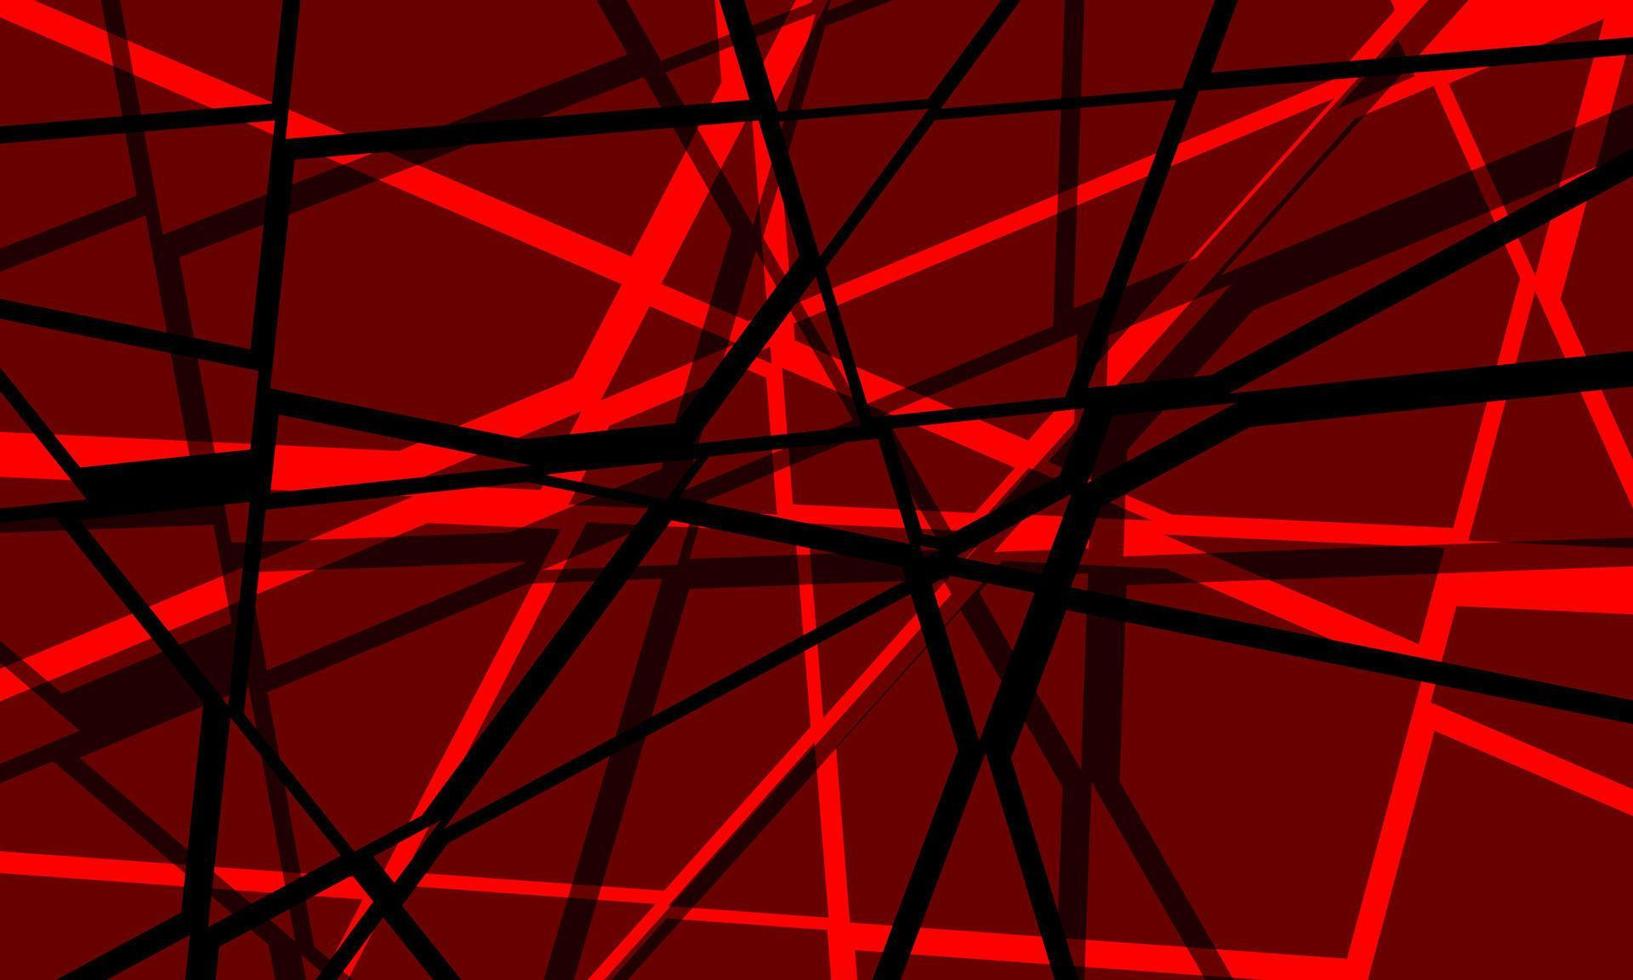 Abstract red black line crack geometric pattern design modern background vector